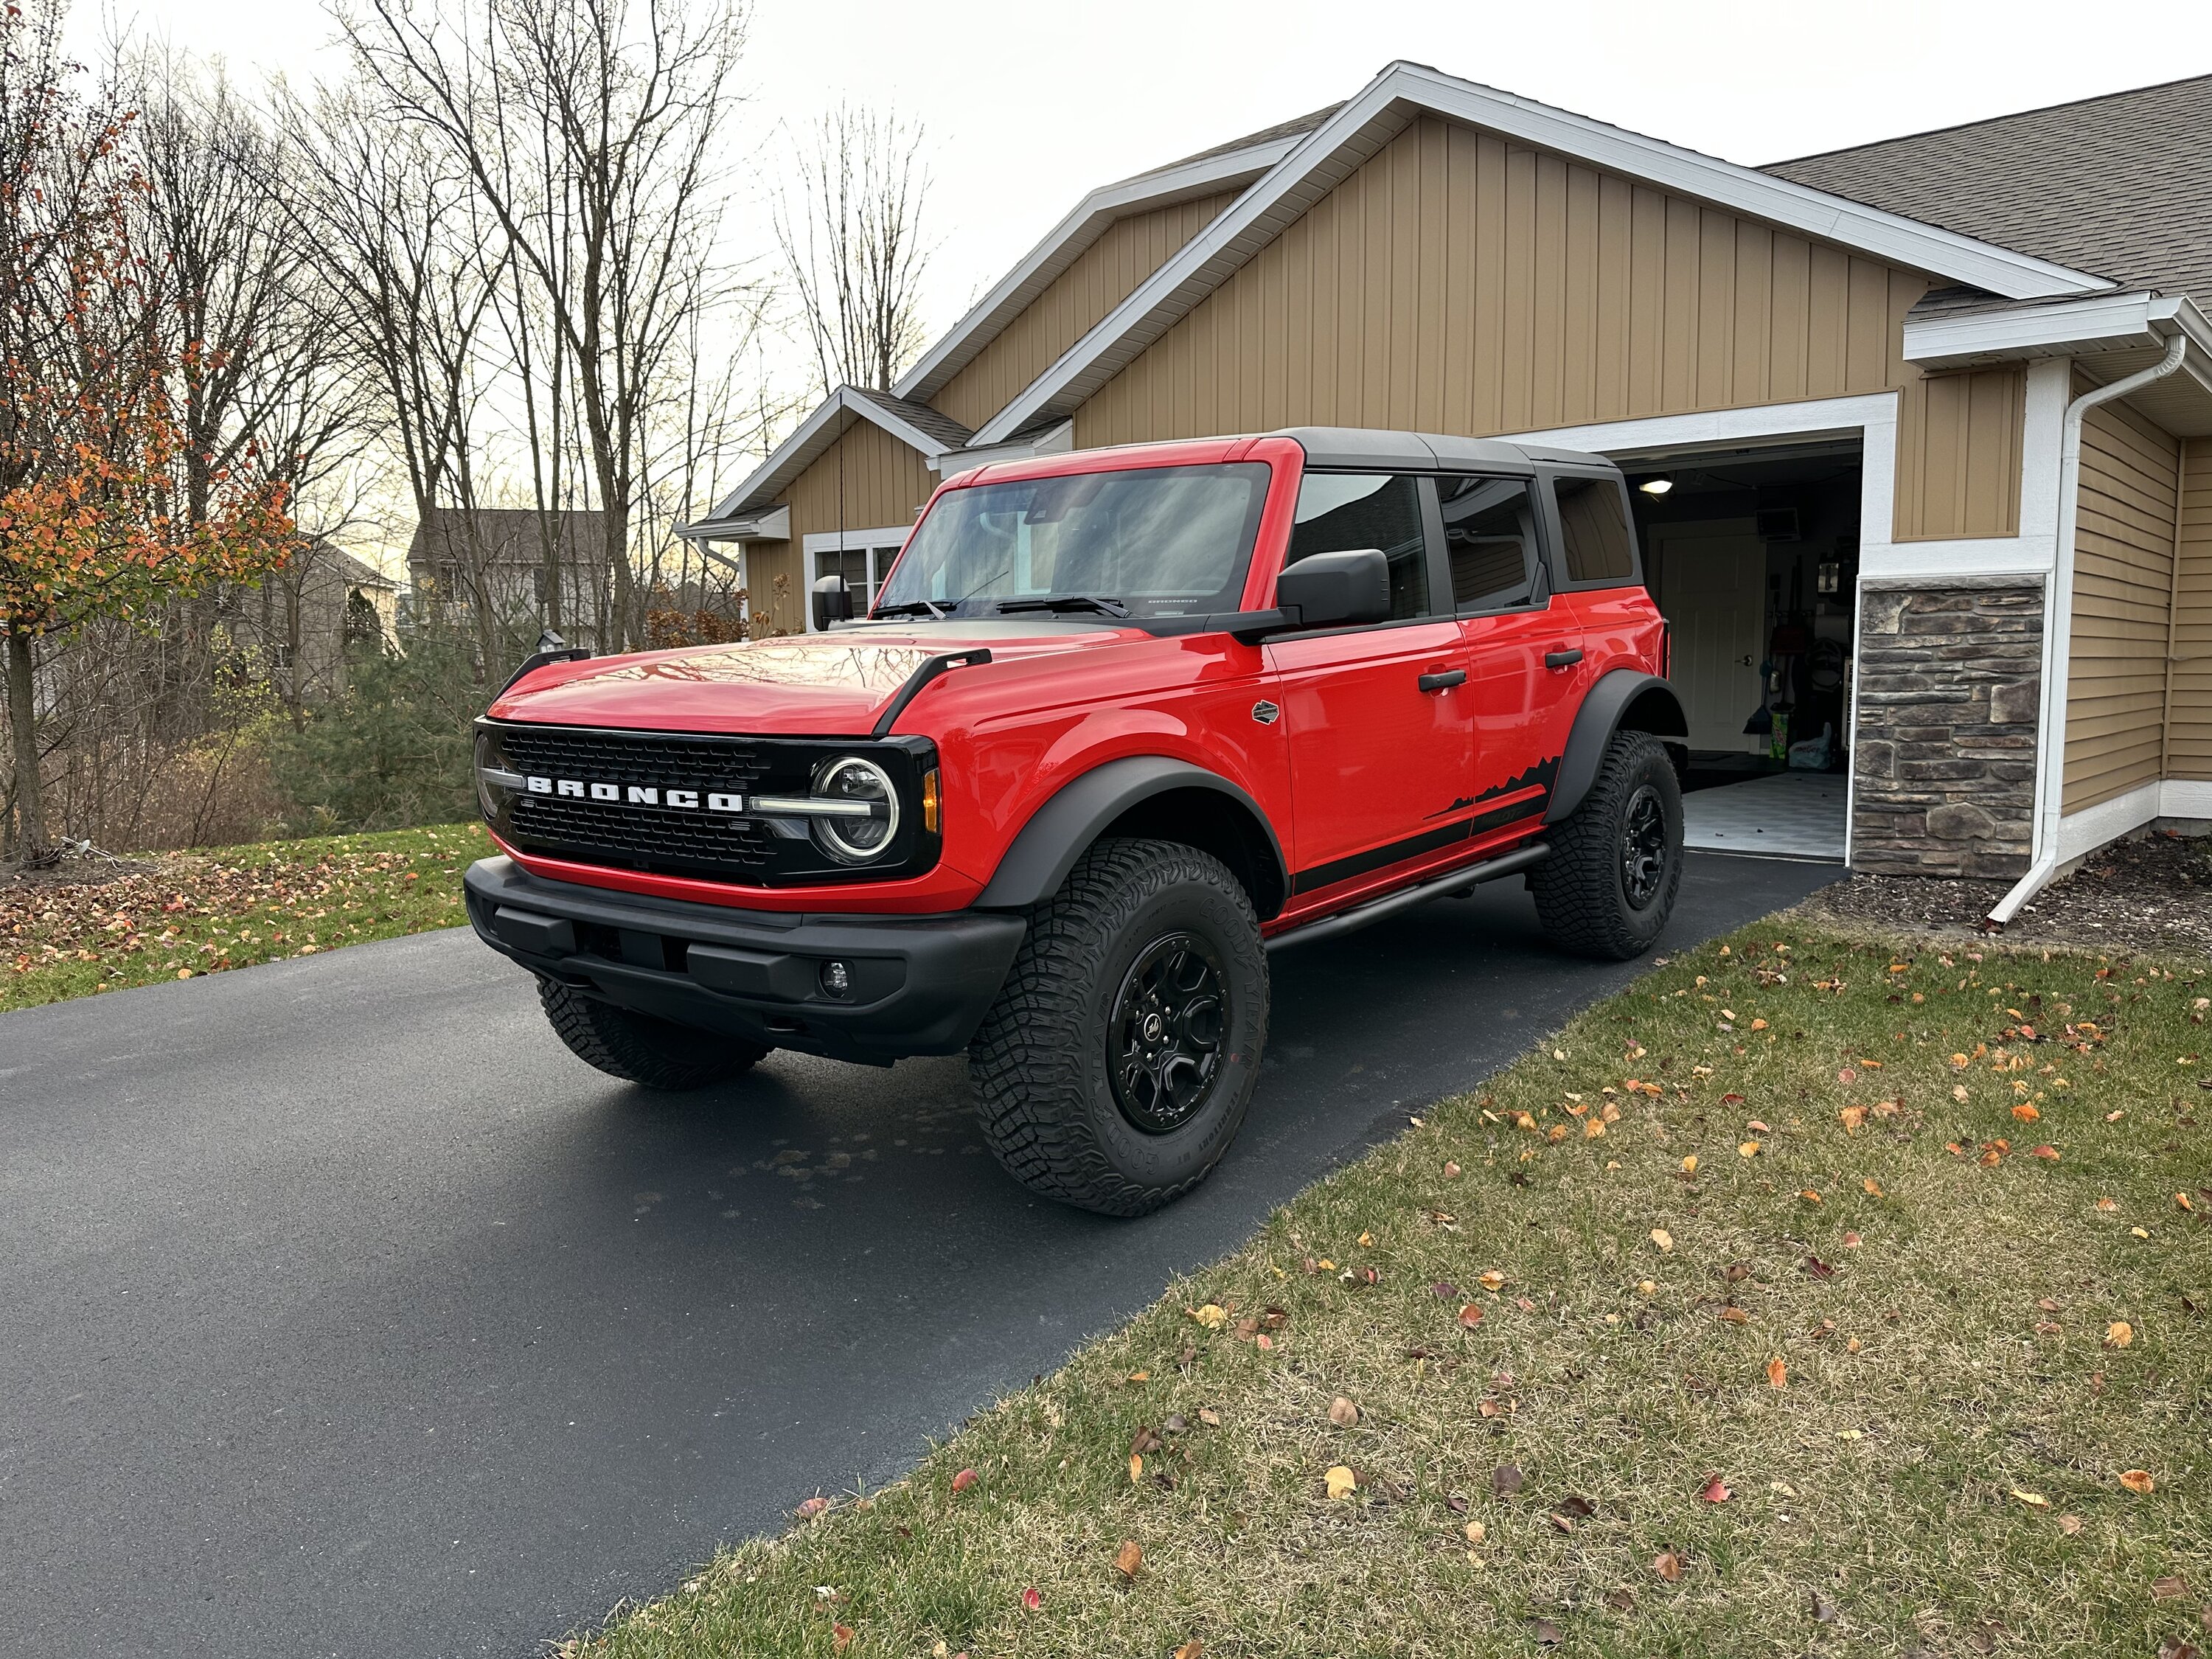 Ford Bronco Bronco6g HELP! Me pick a Color Velocity Blue or Race Red ? ? ? ? Post photos 6D14AAE4-9F87-4A66-8BB1-11D8B654D384